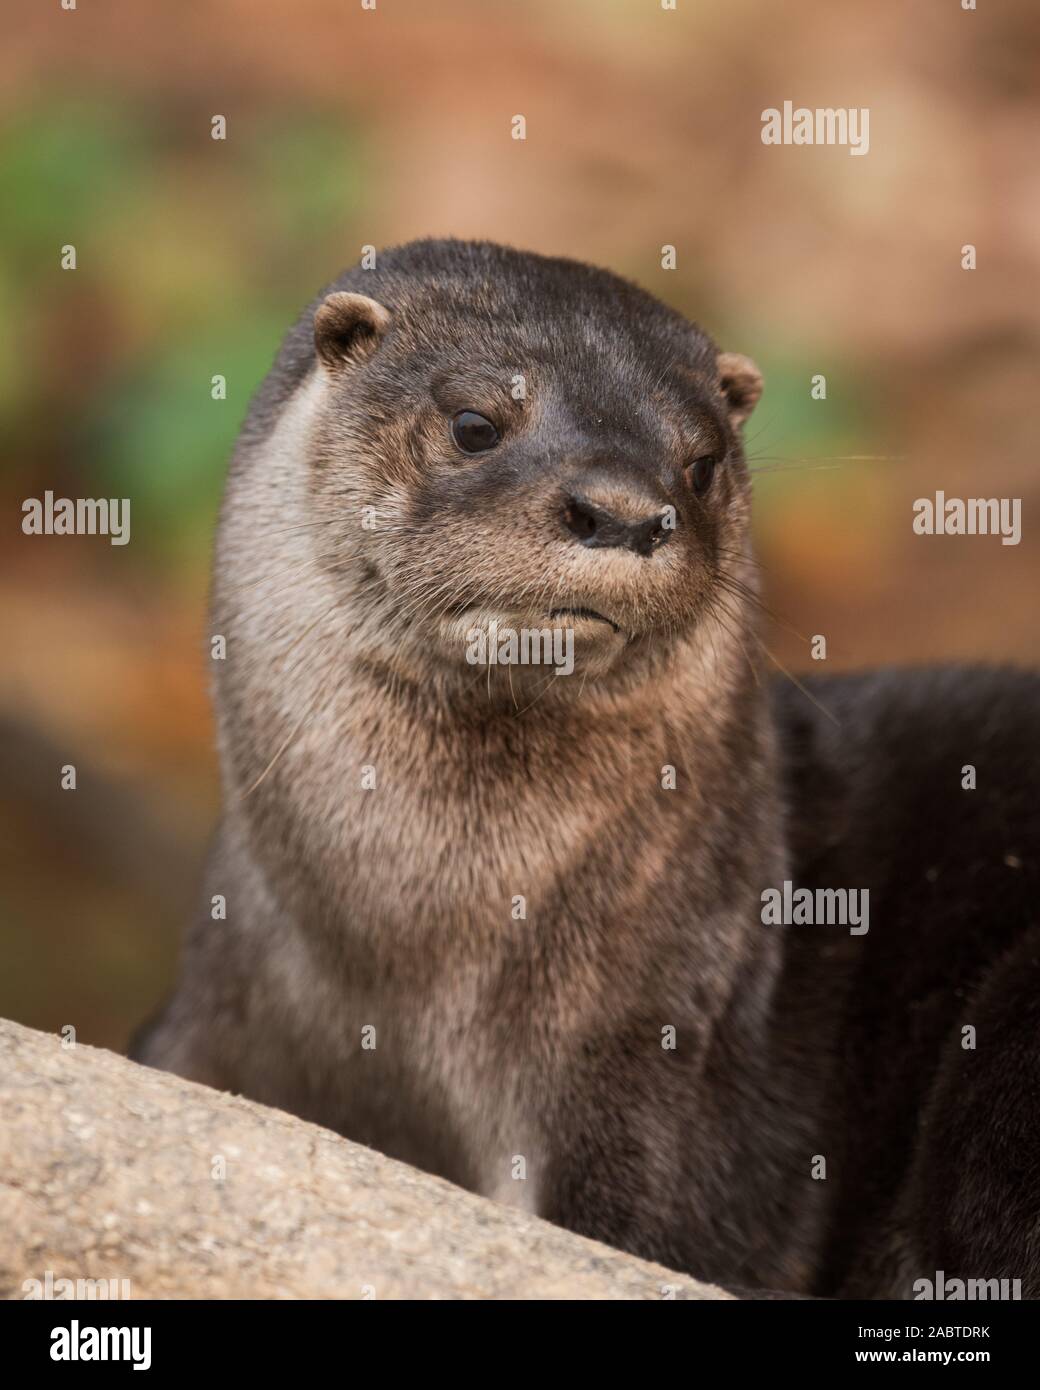 A Neotropical Otter (Lontra longicaudis) from South Pantanal, Brazil Stock Photo